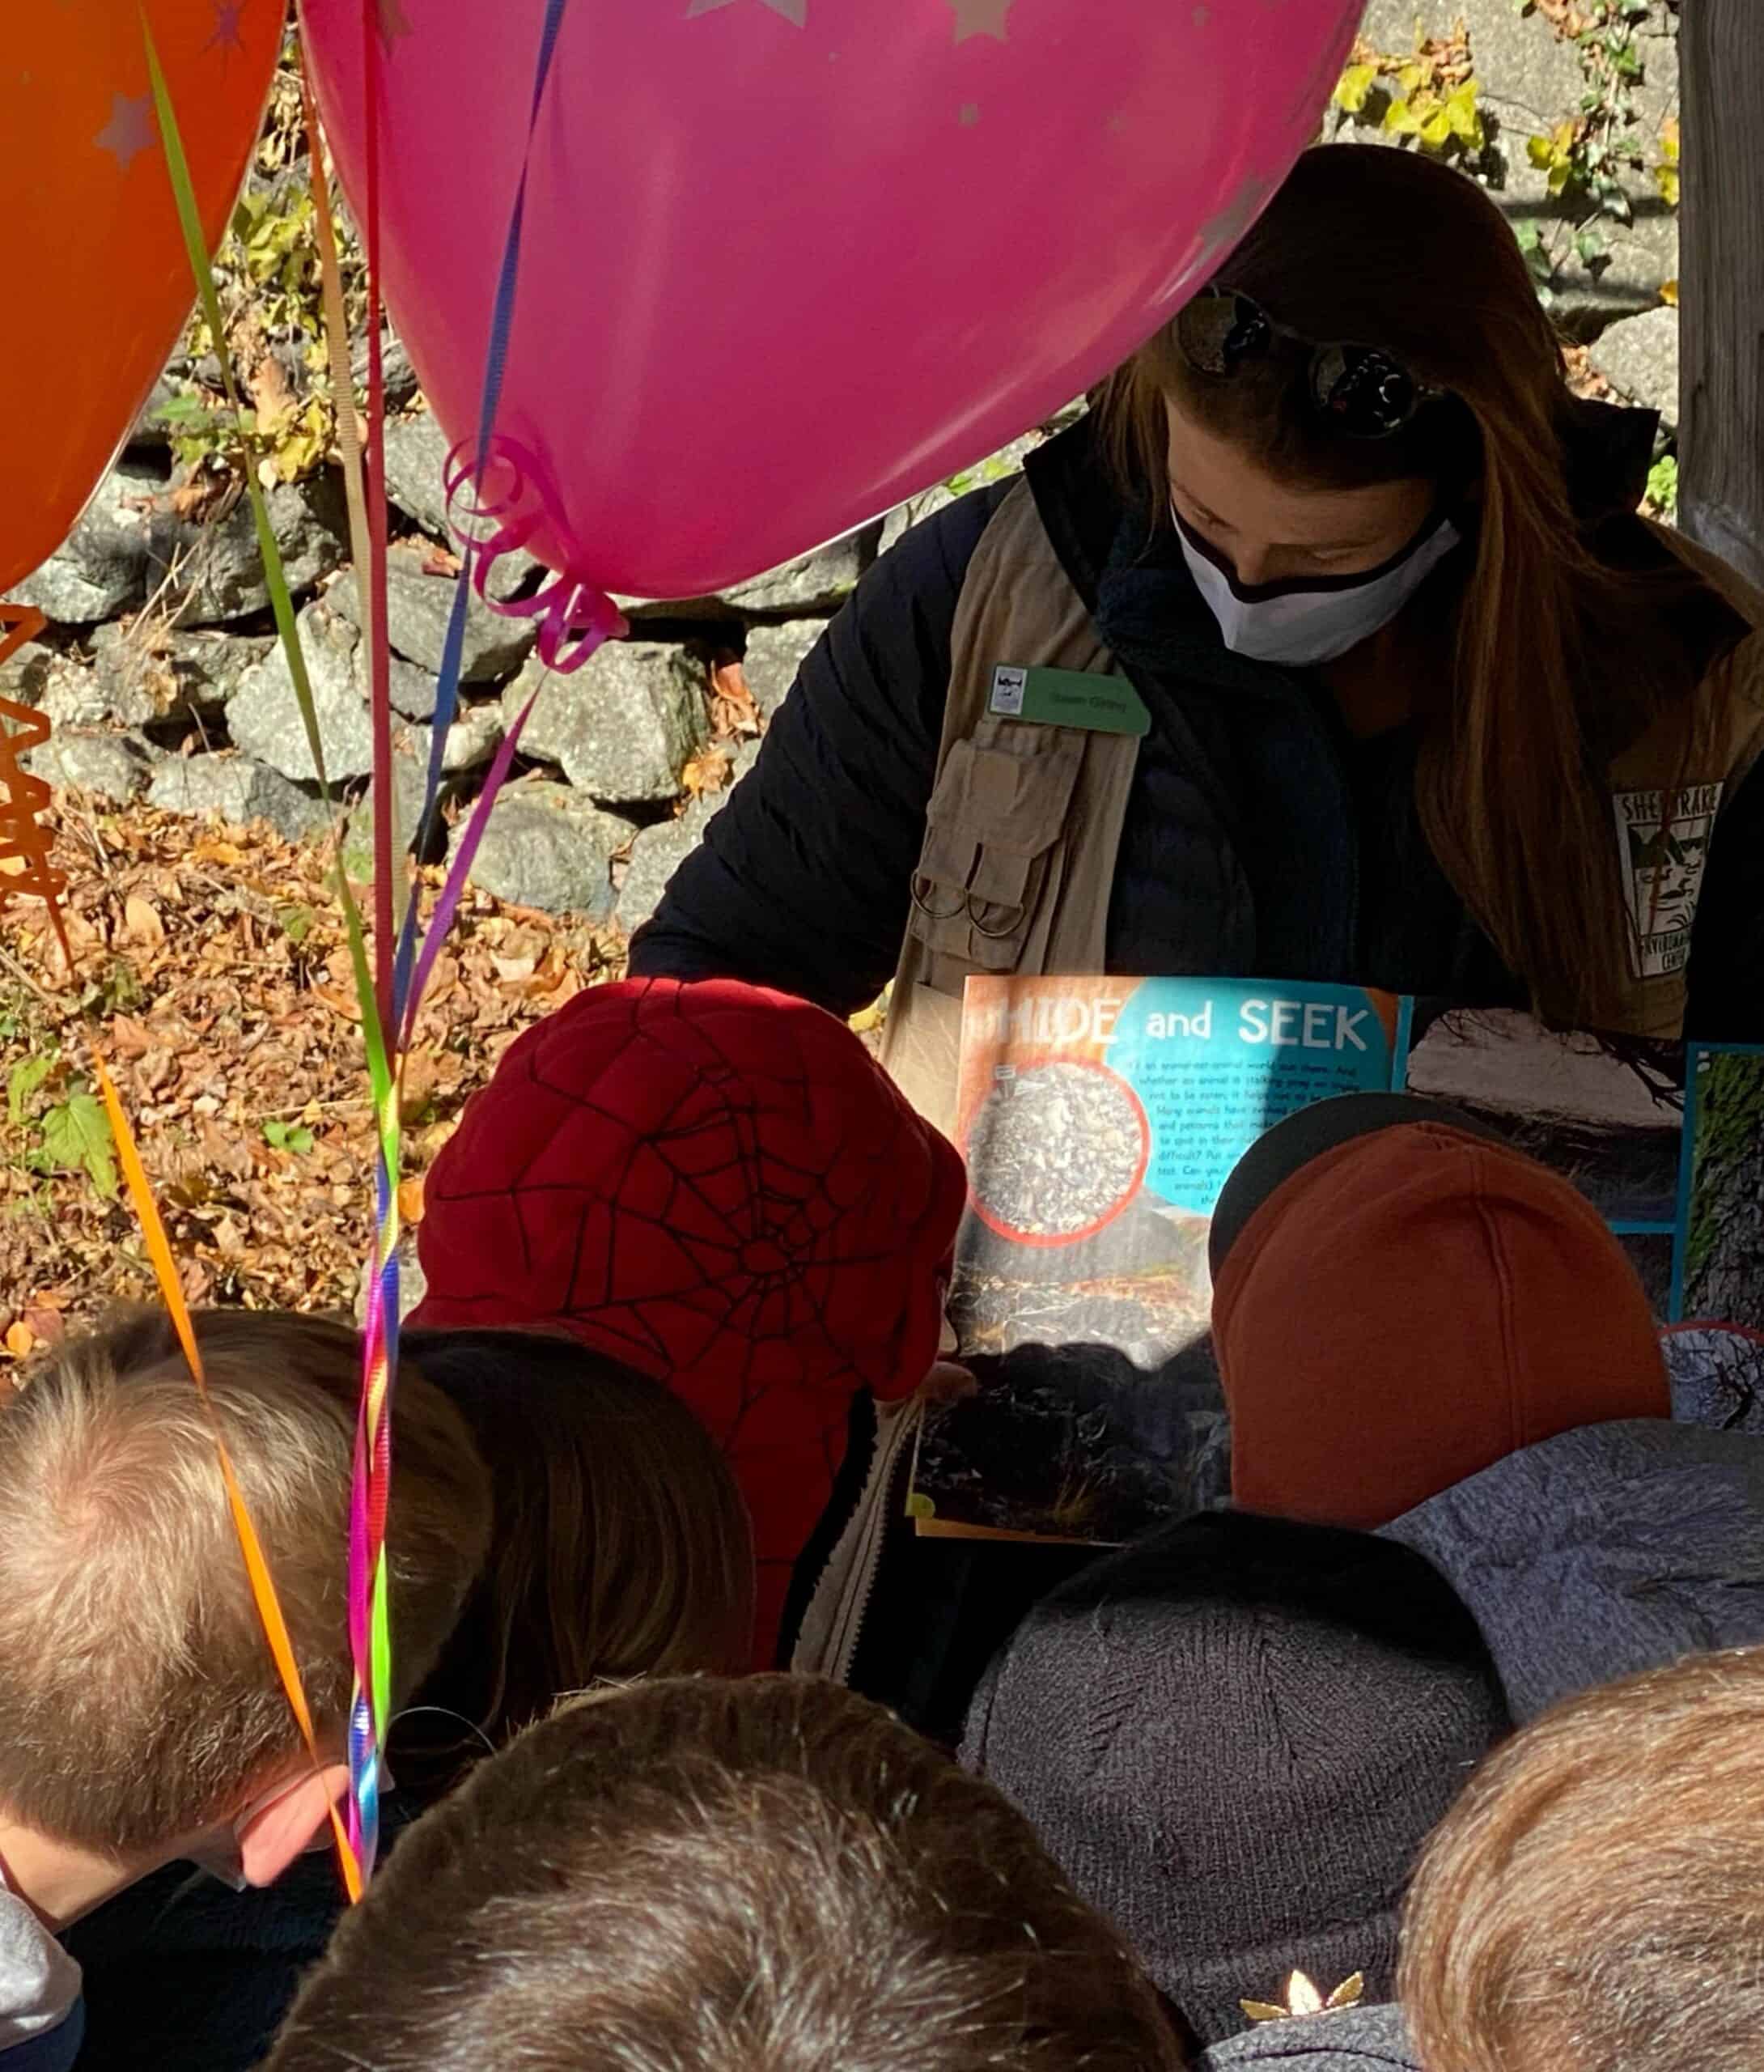 Children being read a story at a Sheldrake birthday party with balloons.